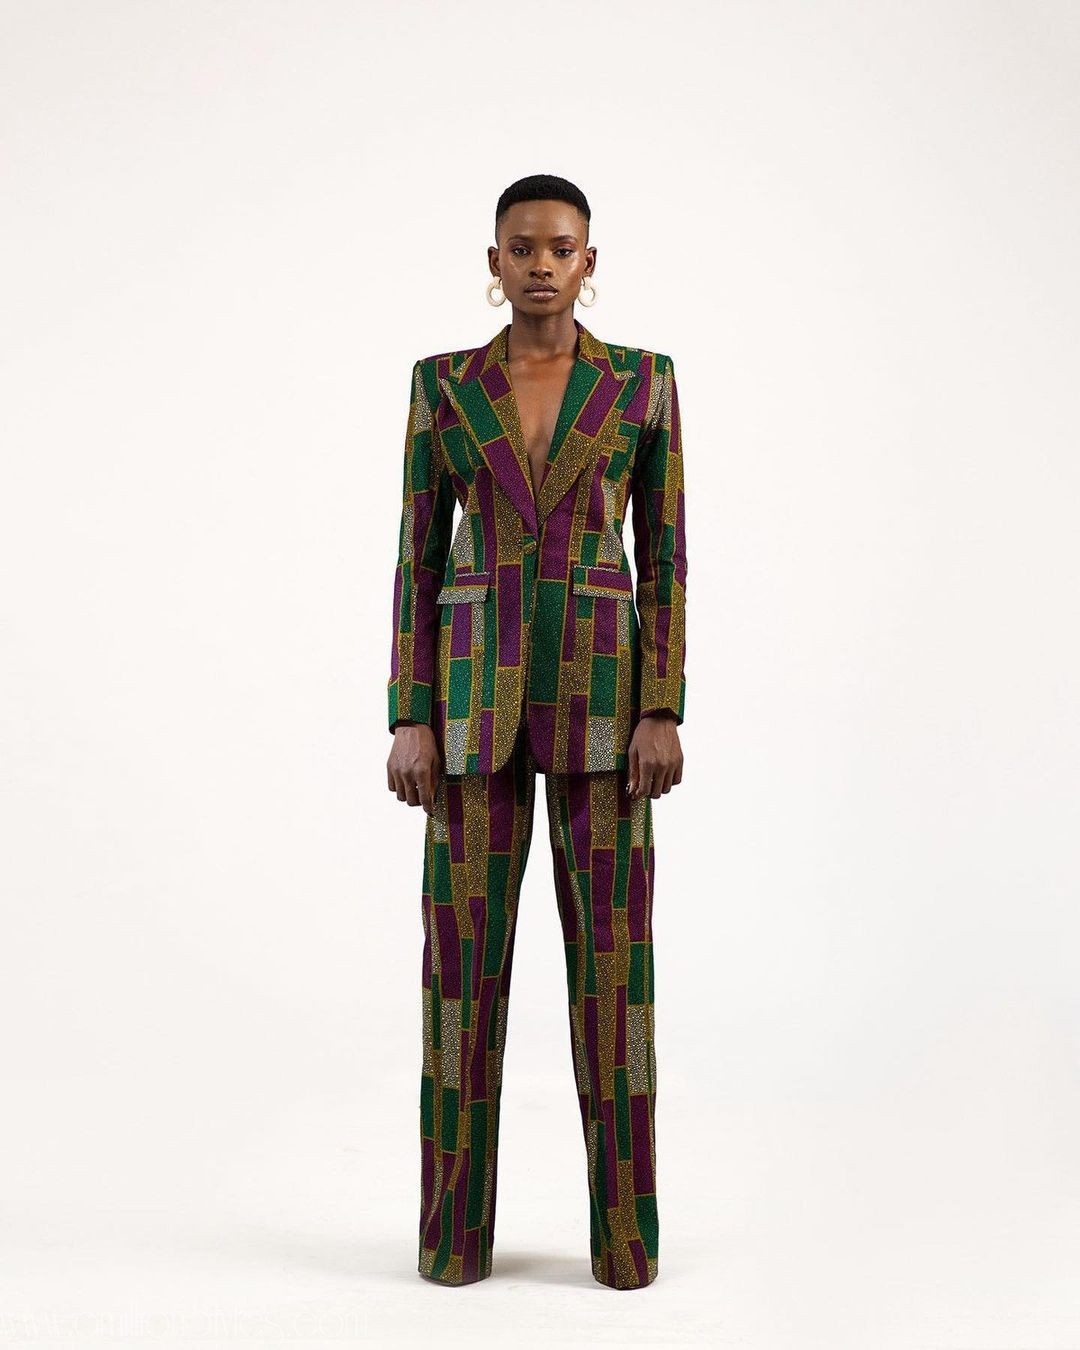 What Do You Think About These 8 Latest Ankara Suits?